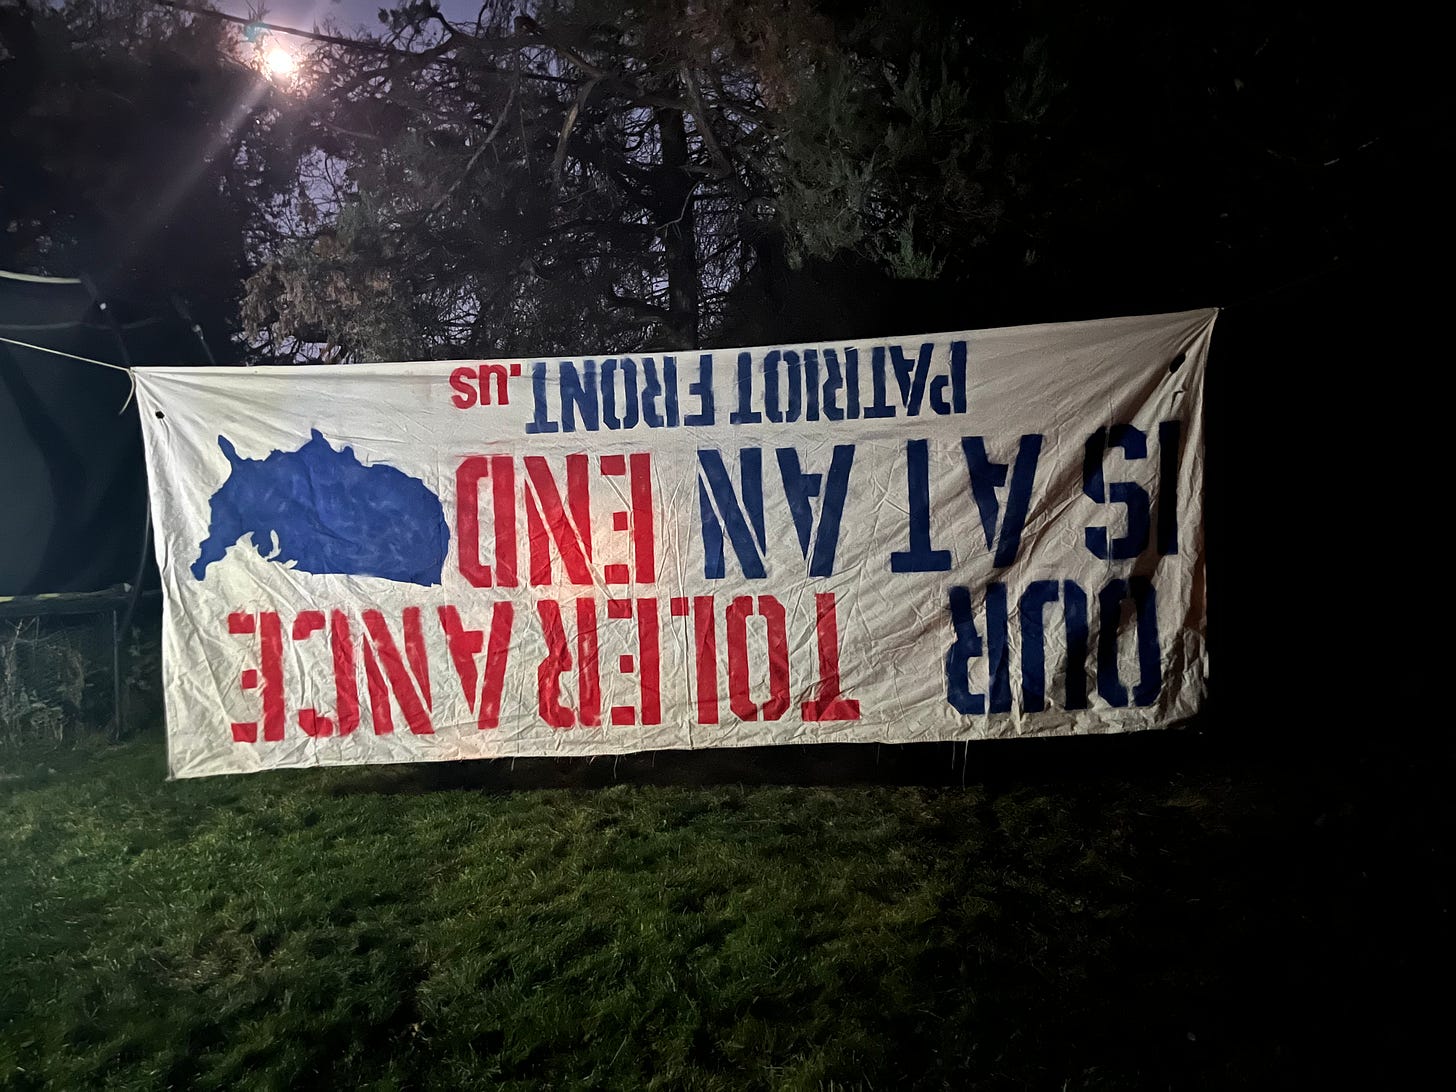 A photograph taken at night, of a flag made by the white supremacist group Patriot Front, which reads "OUR TOLERANCE IS AT AN END" in red and blue. It is hung upside down. Trees are visible in the background, and grass is visible below.